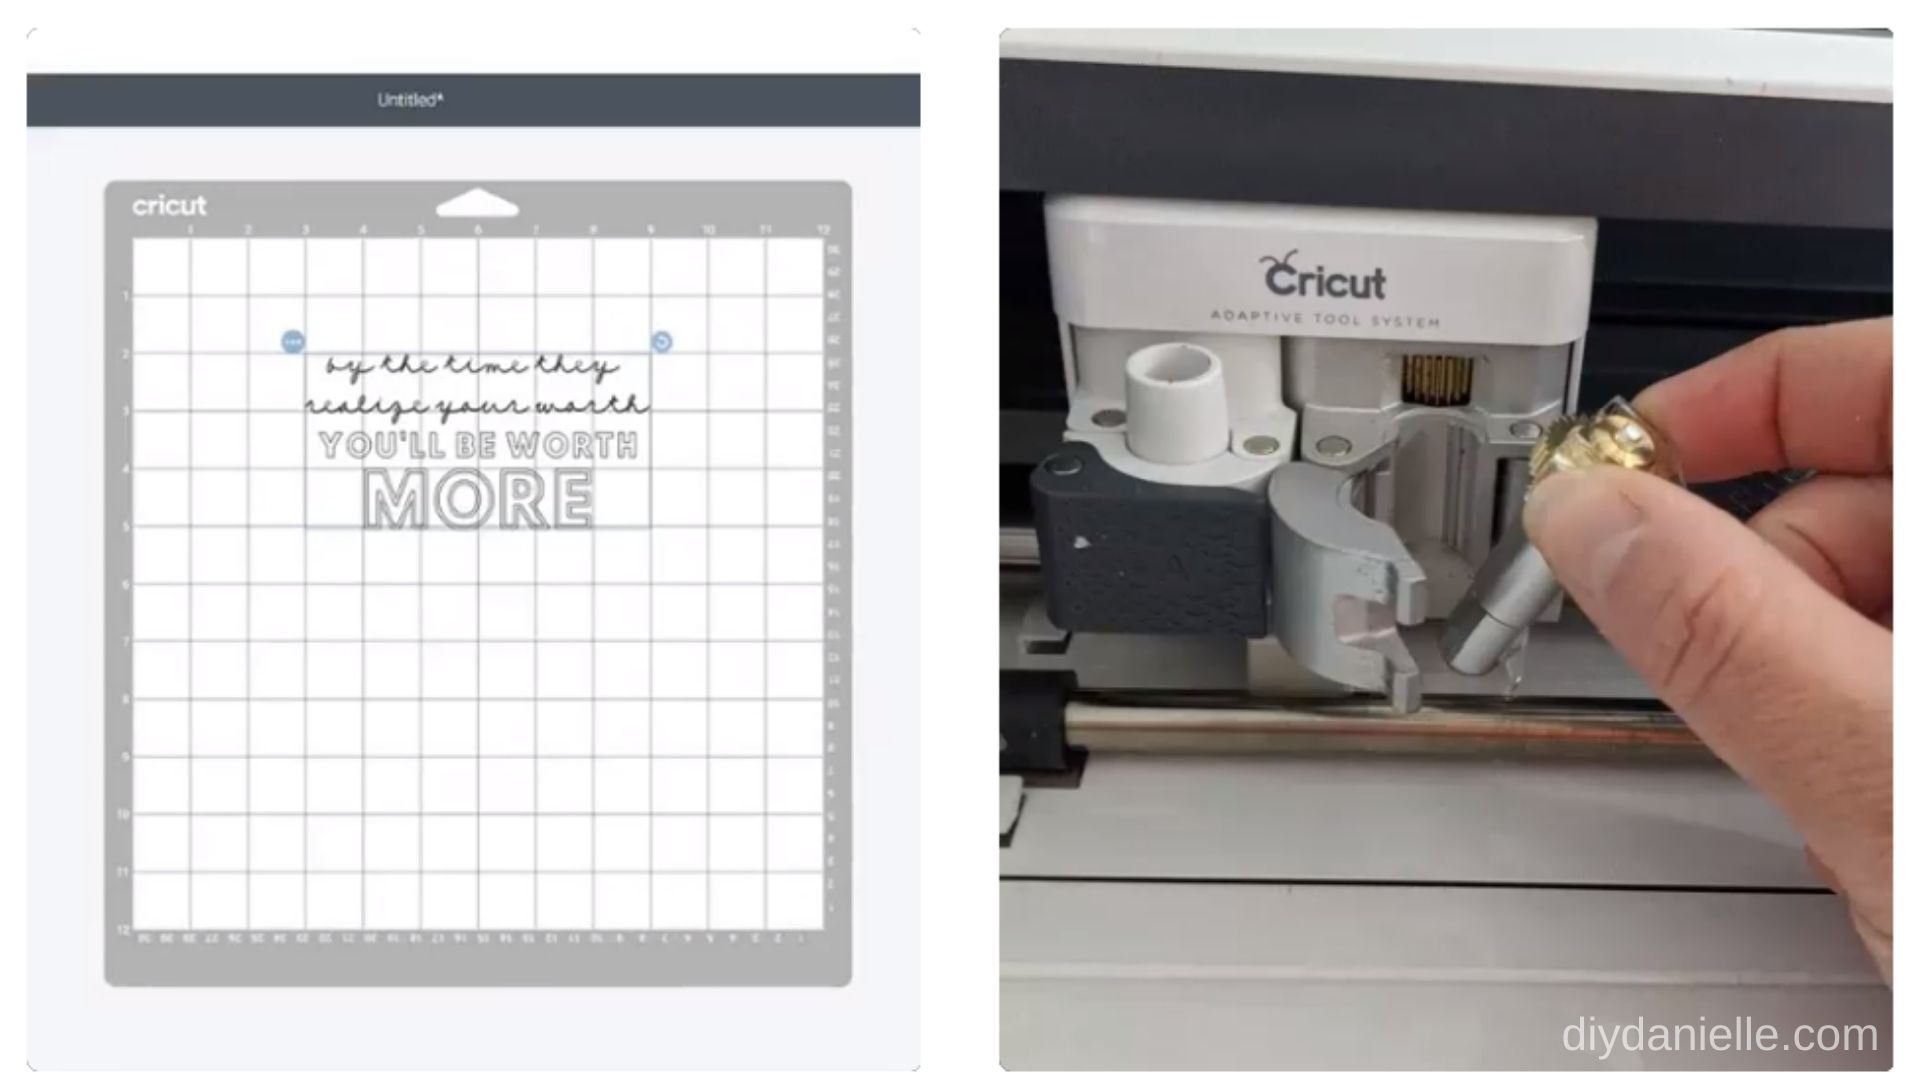 How to Use the Cricut Engraving Tool